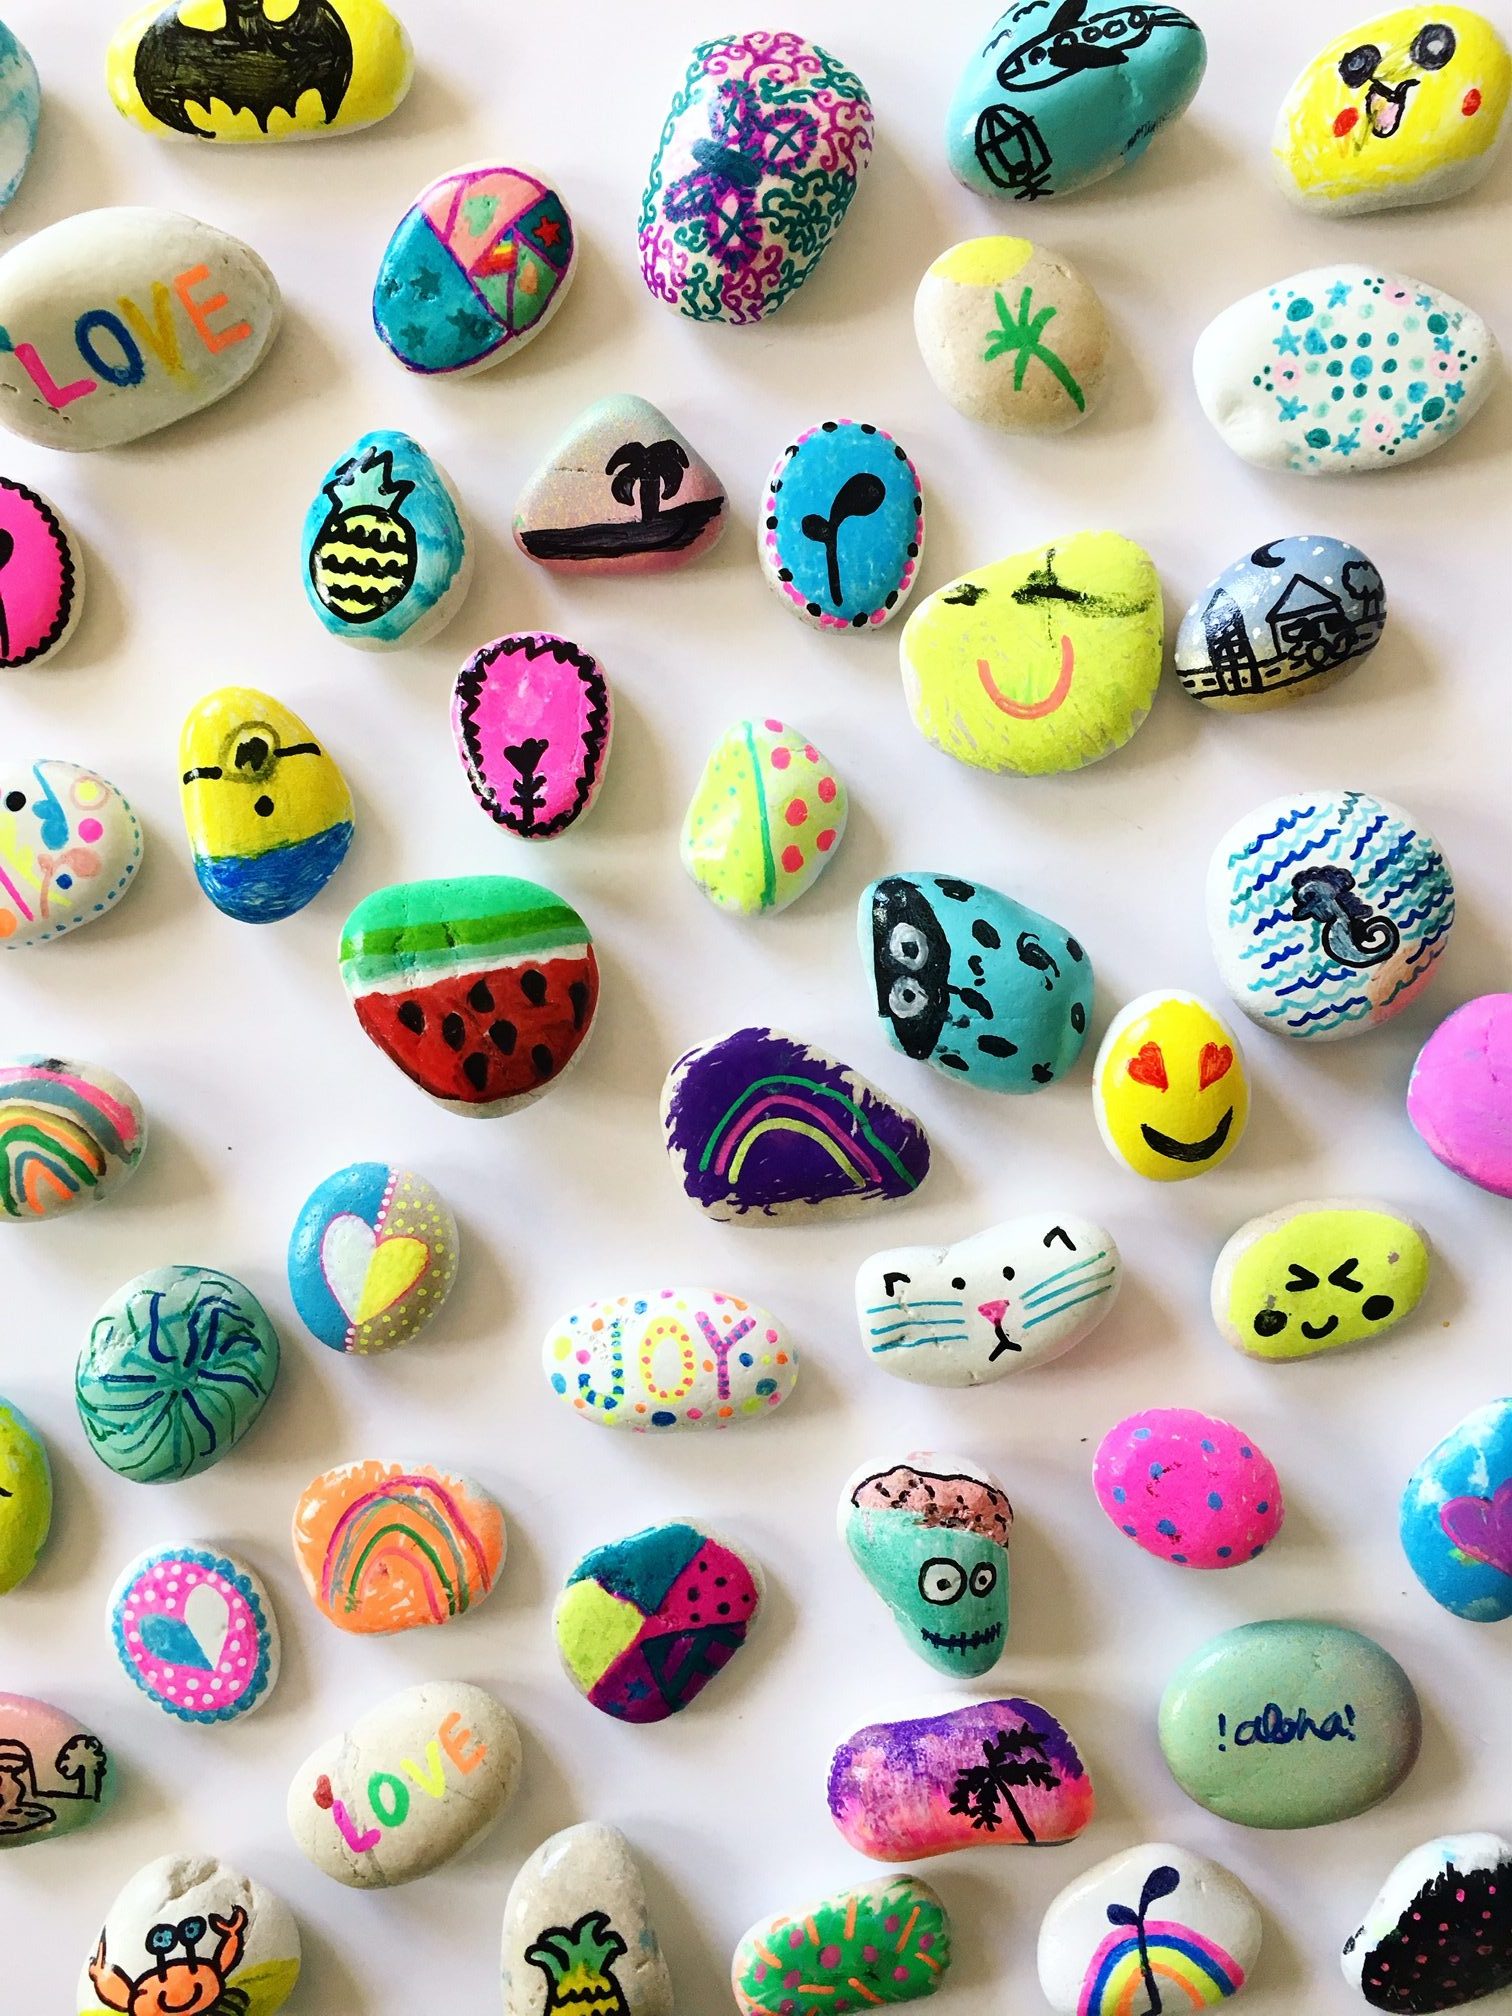 DIY Painted Rocks - The Home Depot